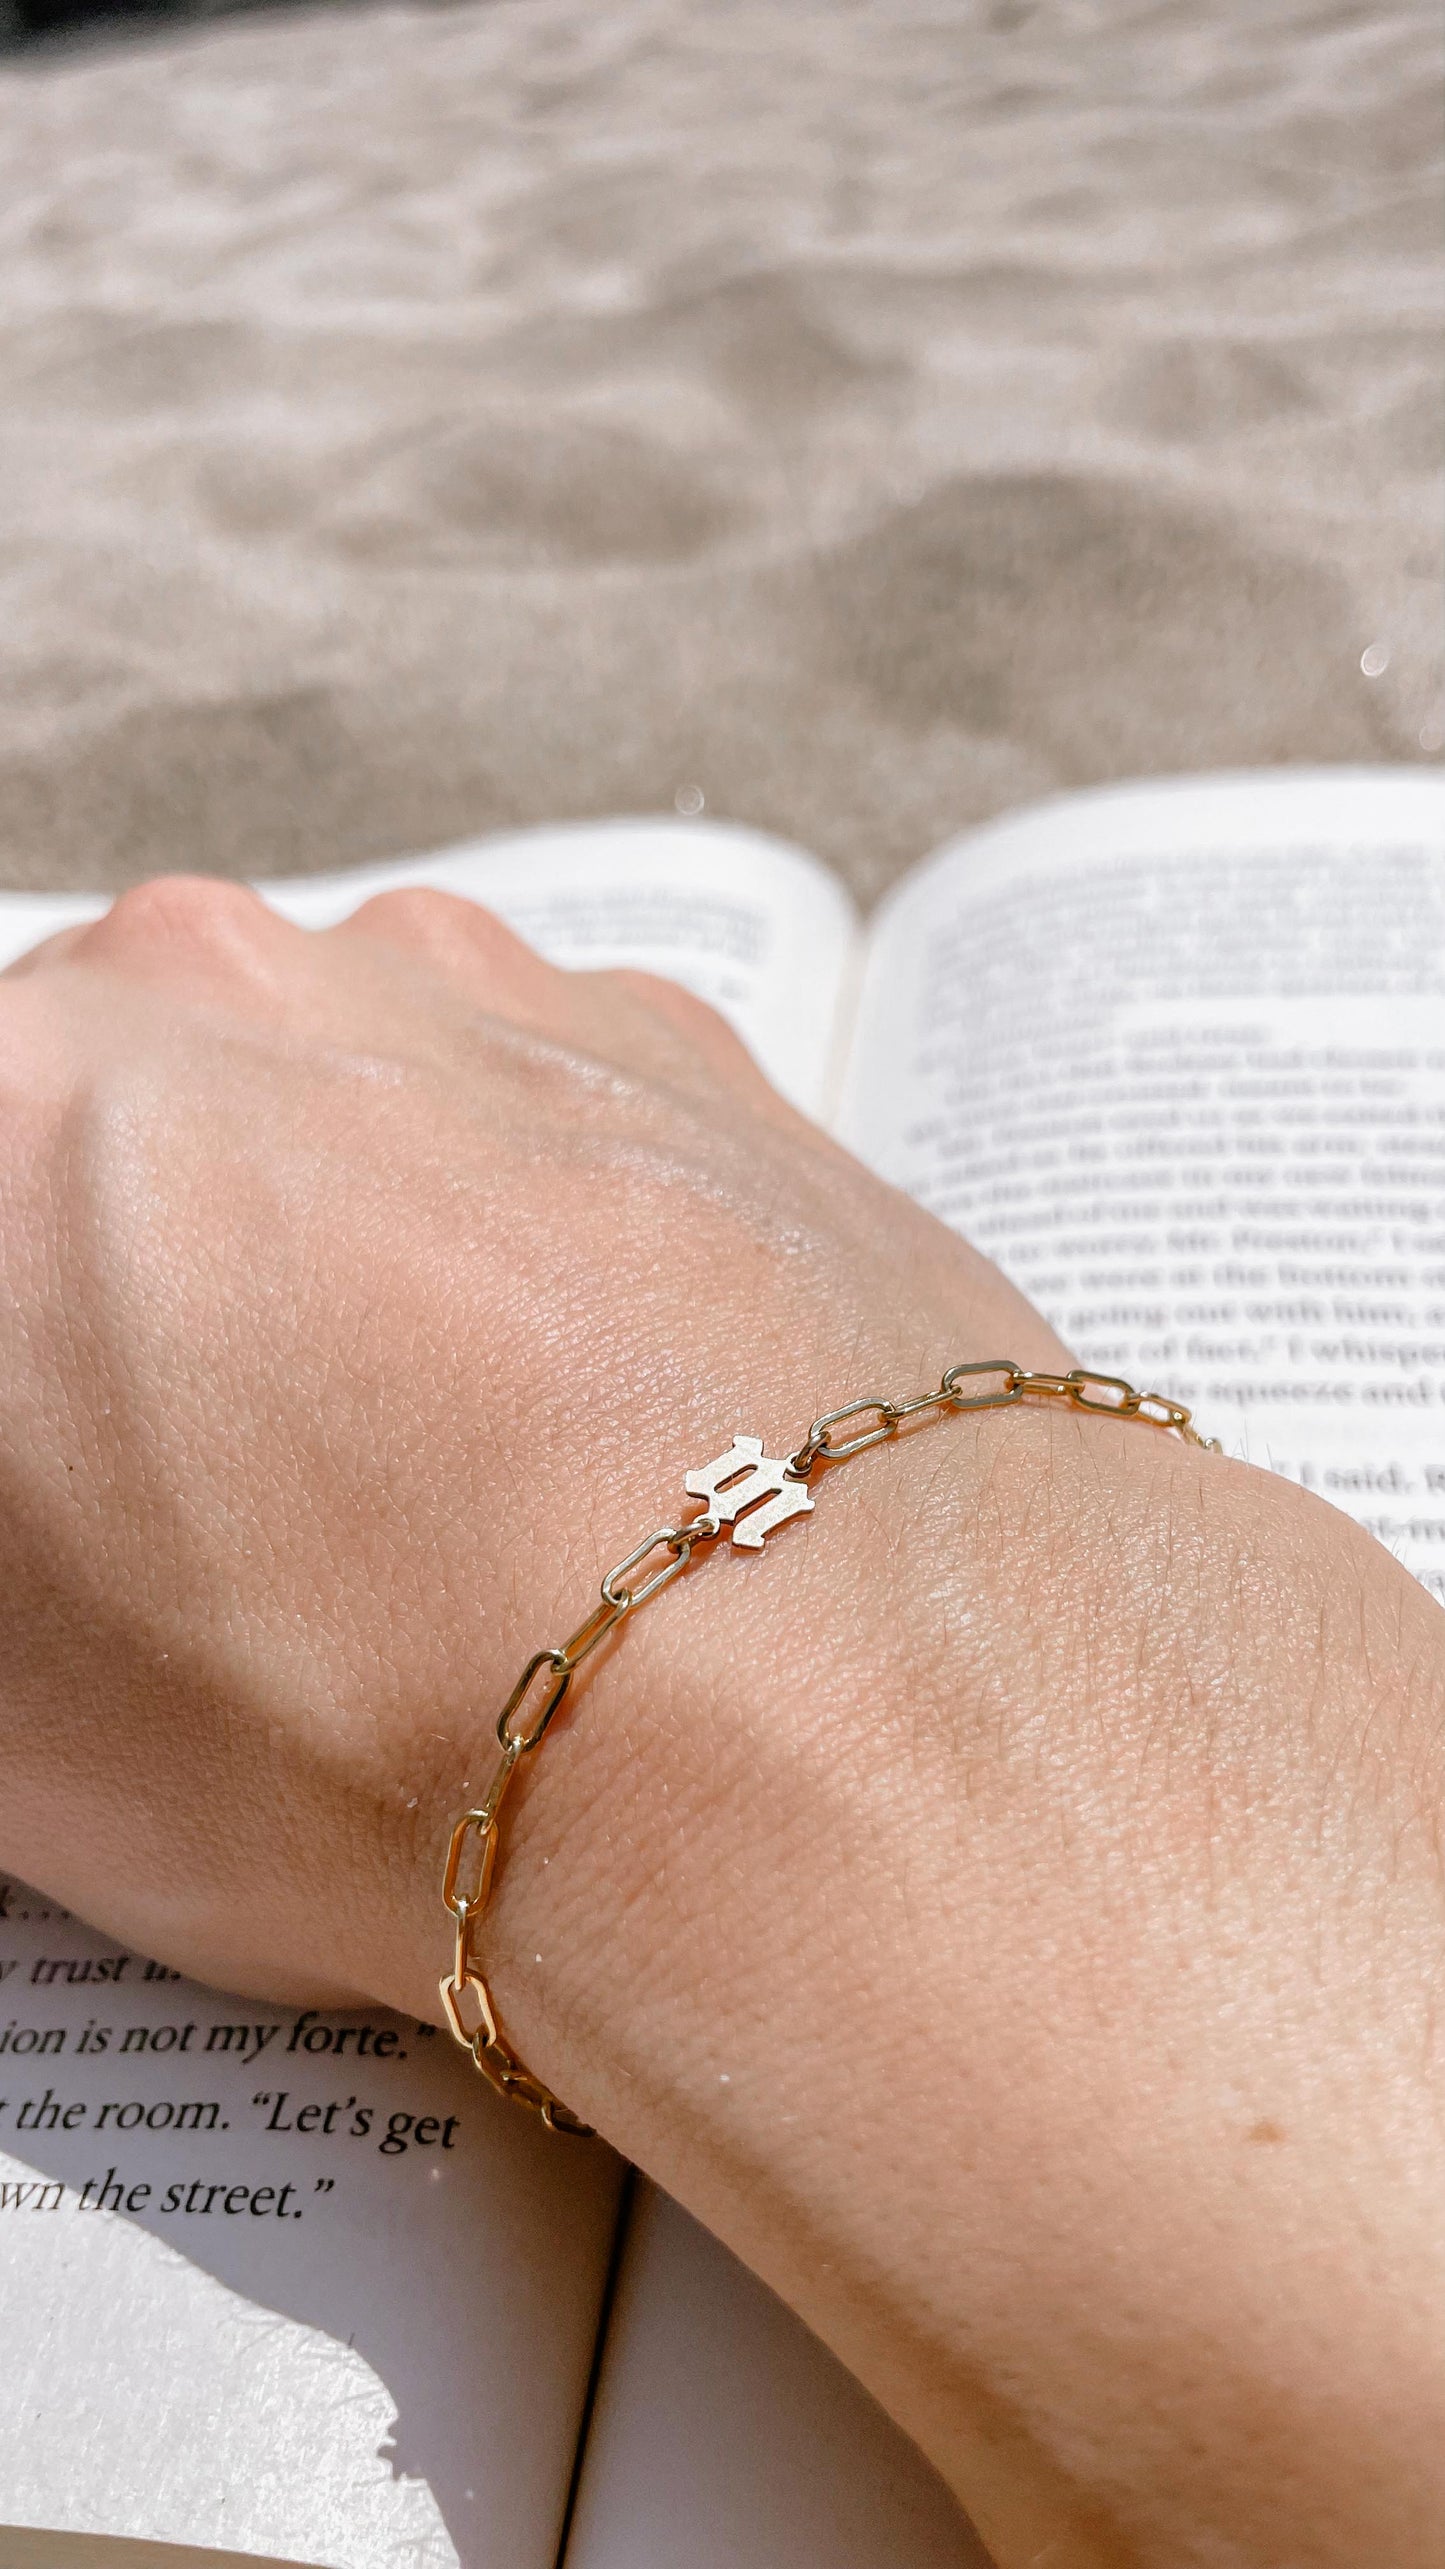 14k GF Initial Charm add-on for Permanent Jewelry // Pre-order for IN-PERSON events only 🫶